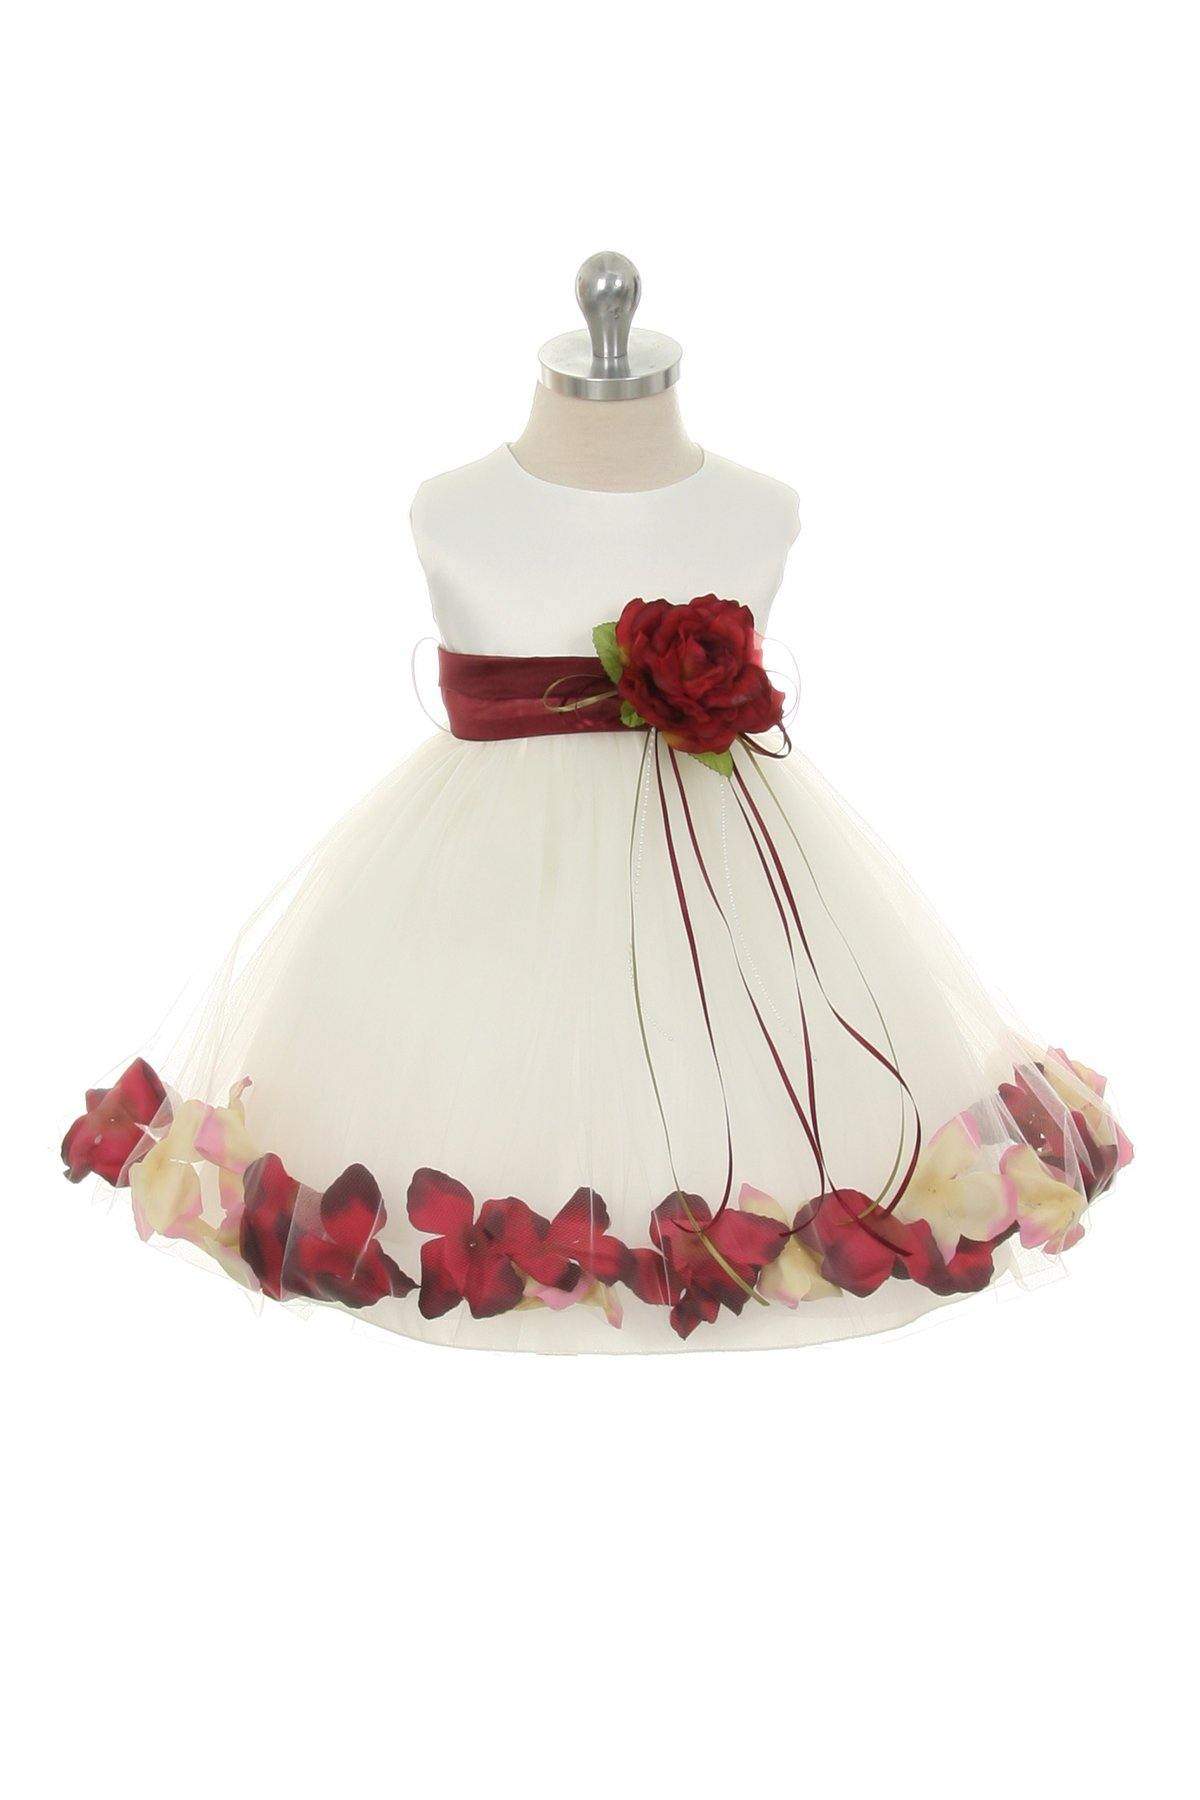 Satin Flower Petal Dress for Baby (18 Colors)-Kid's Dream-baby-dress,baby_girl,color_Dusty Rose,color_Ivory,color_White,fabric_Satin,fabric_Tulle,meta-related-collection-shop-the-outfit-baby,size_L-18 Months,size_M-12 Months,size_S-6 Months,size_XL-24 Months